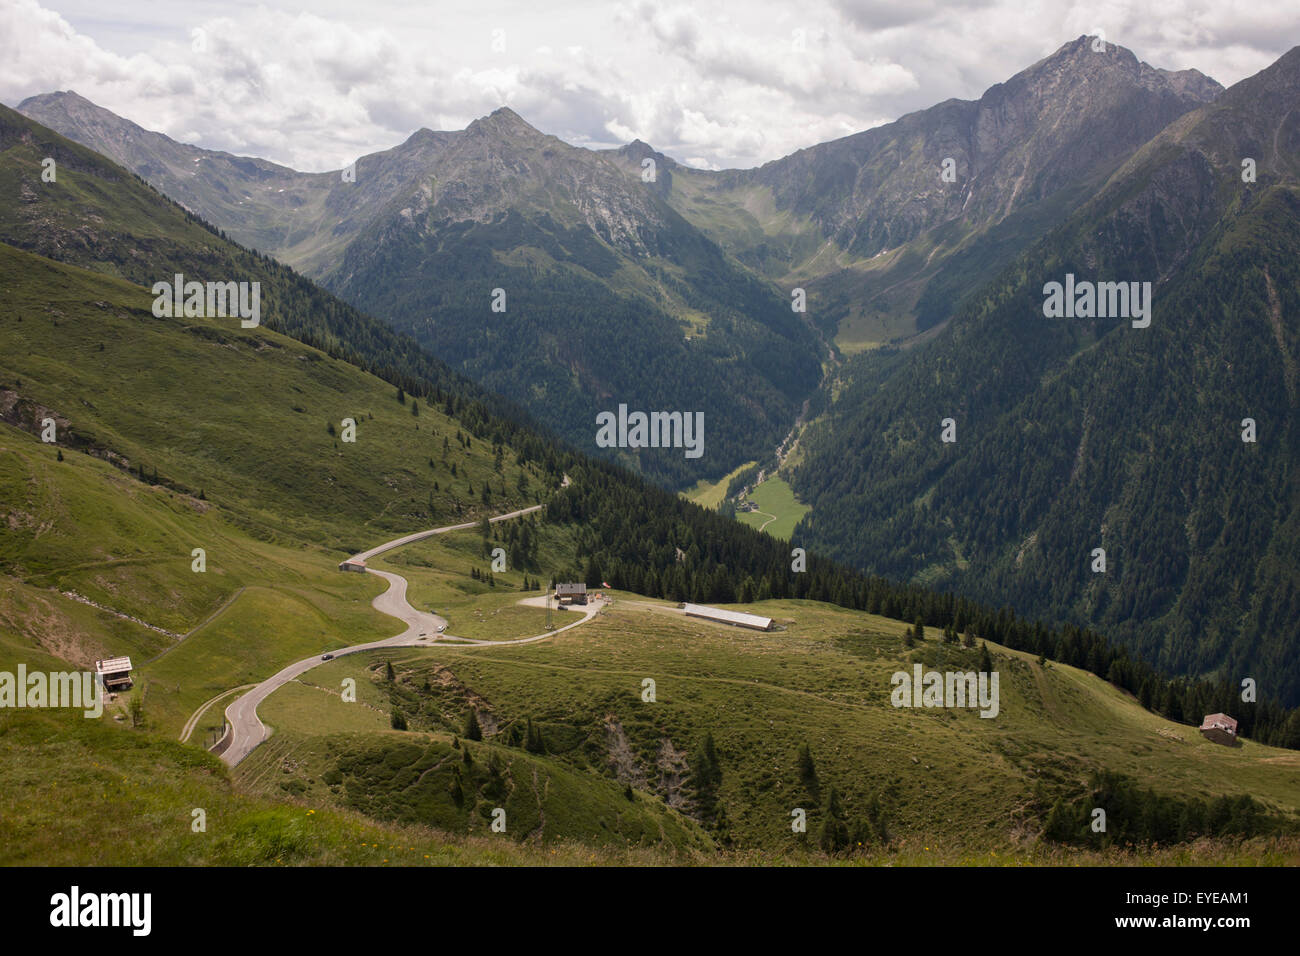 Landscape near the top of the Jaufenpass, the highest point at 2,094 metres  on the road between Meran-merano and Sterzing-Vipite Stock Photo - Alamy